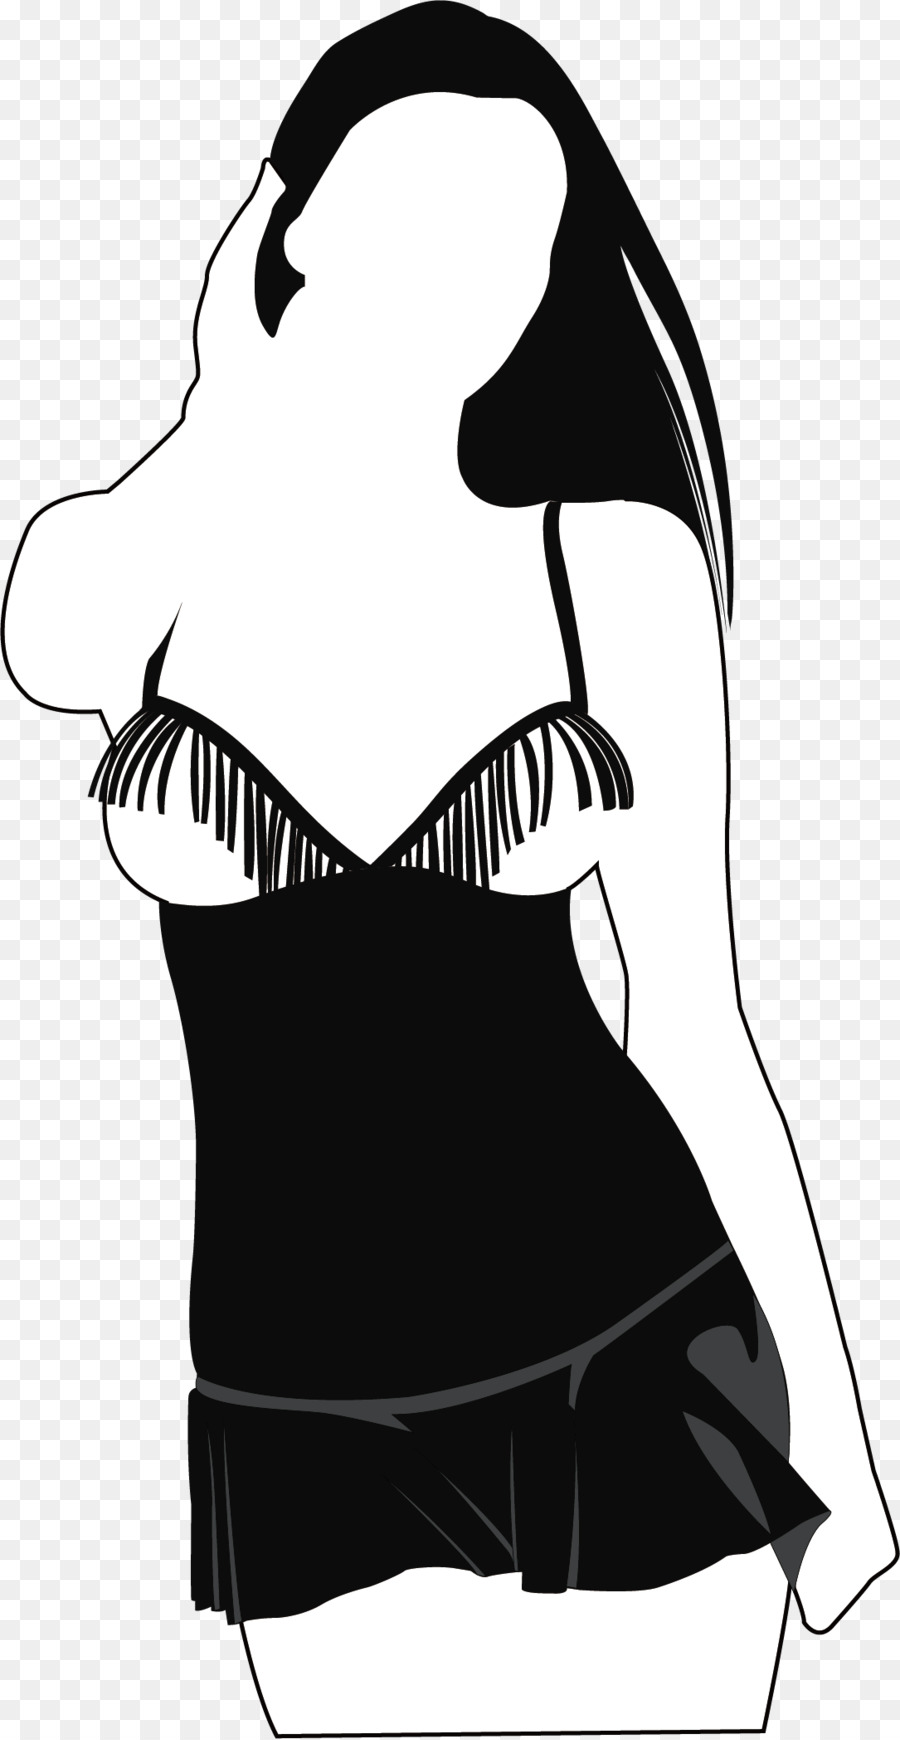 Woman Silhouette Black and white Illustration - Cartoon woman png download - 1085*2096 - Free Transparent  png Download.